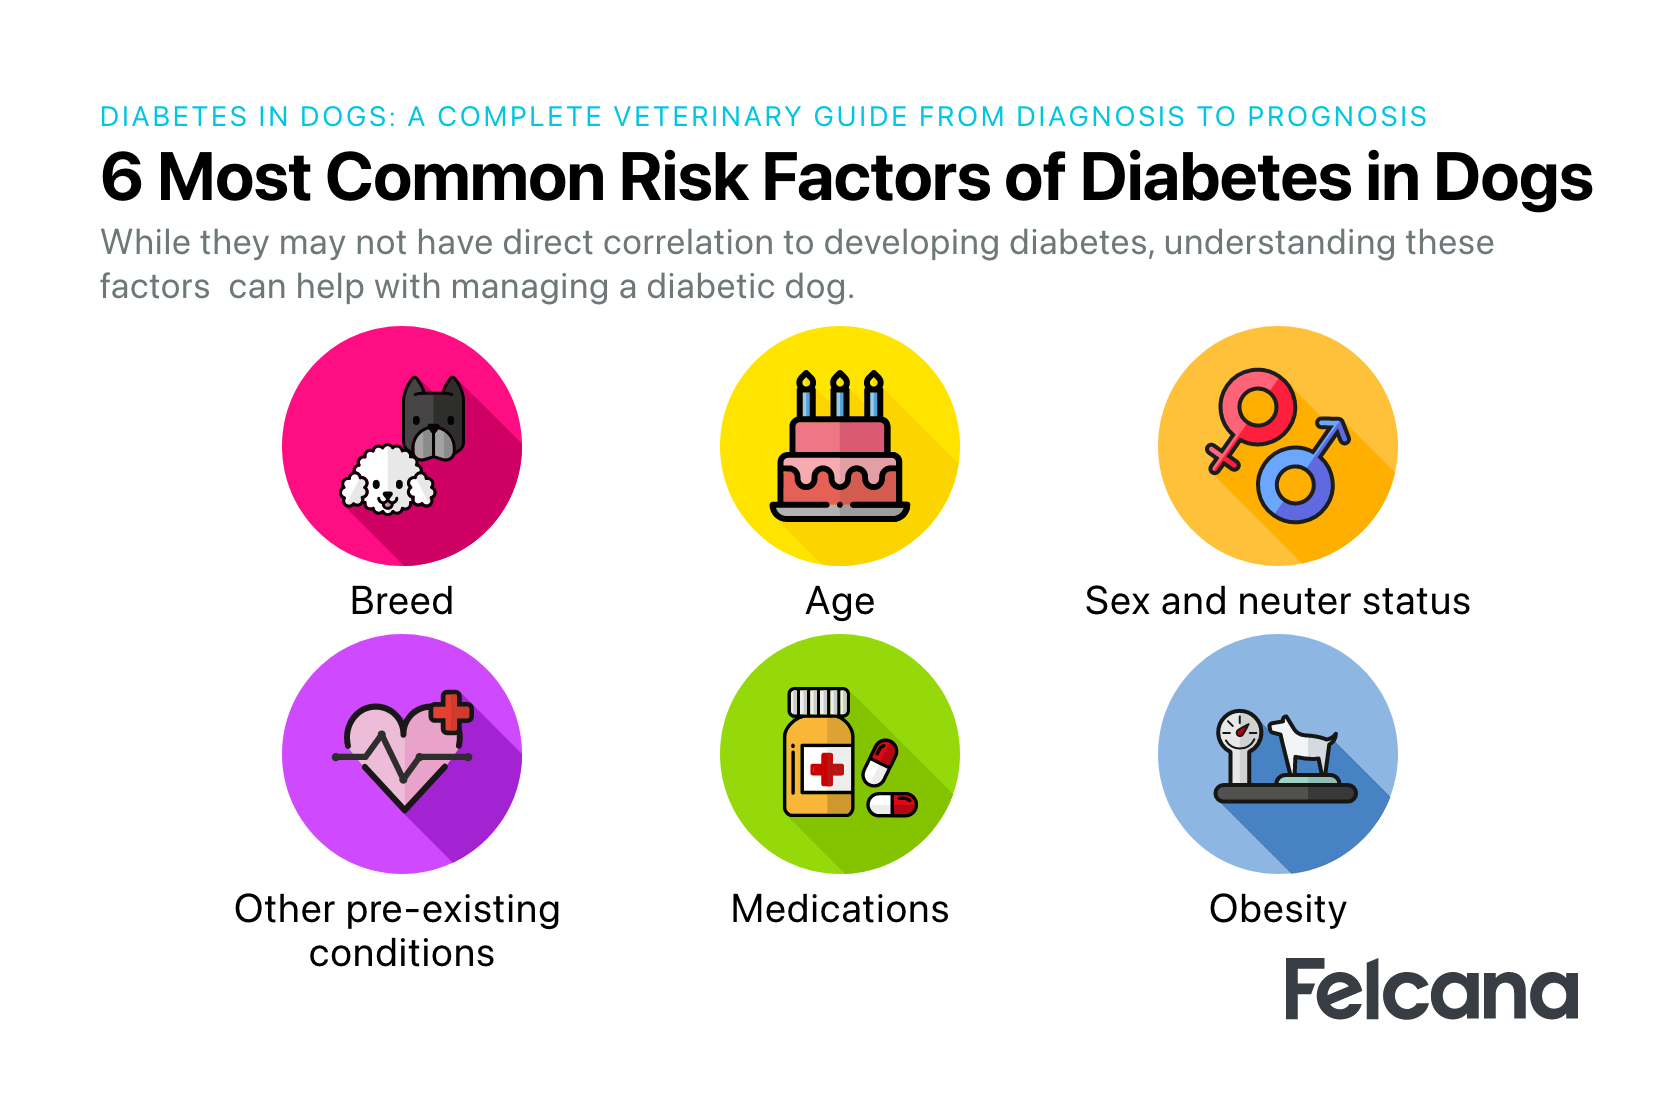 Dog diabetes risk factors, including breed, age, sex, neuter status, pre-existing condition, medications and obesity.